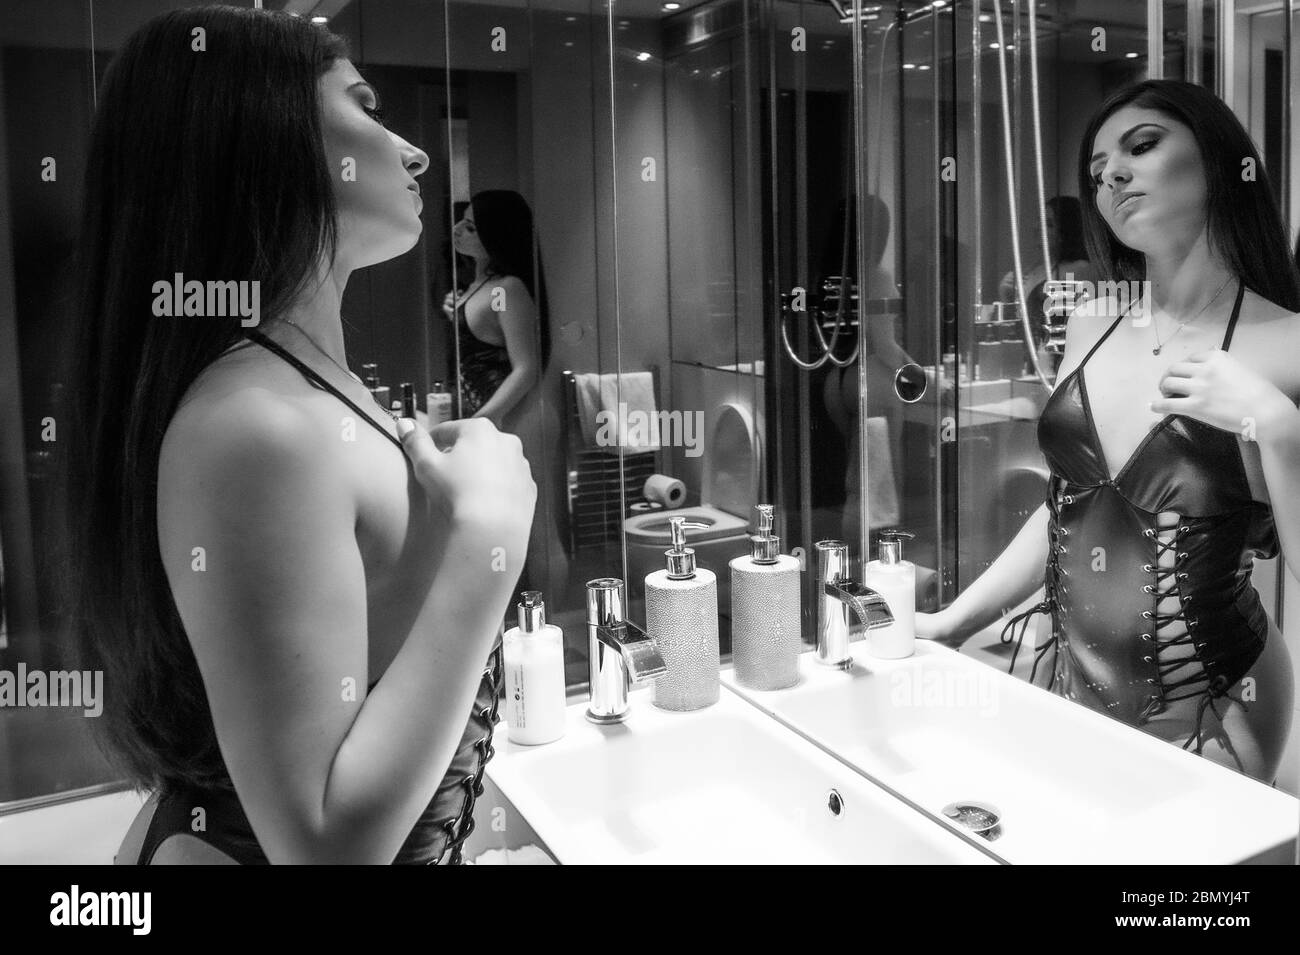 A black and white image of a young caucasian woman looking at a mirror wearing lingerie at a boudoir location. Stock Photo